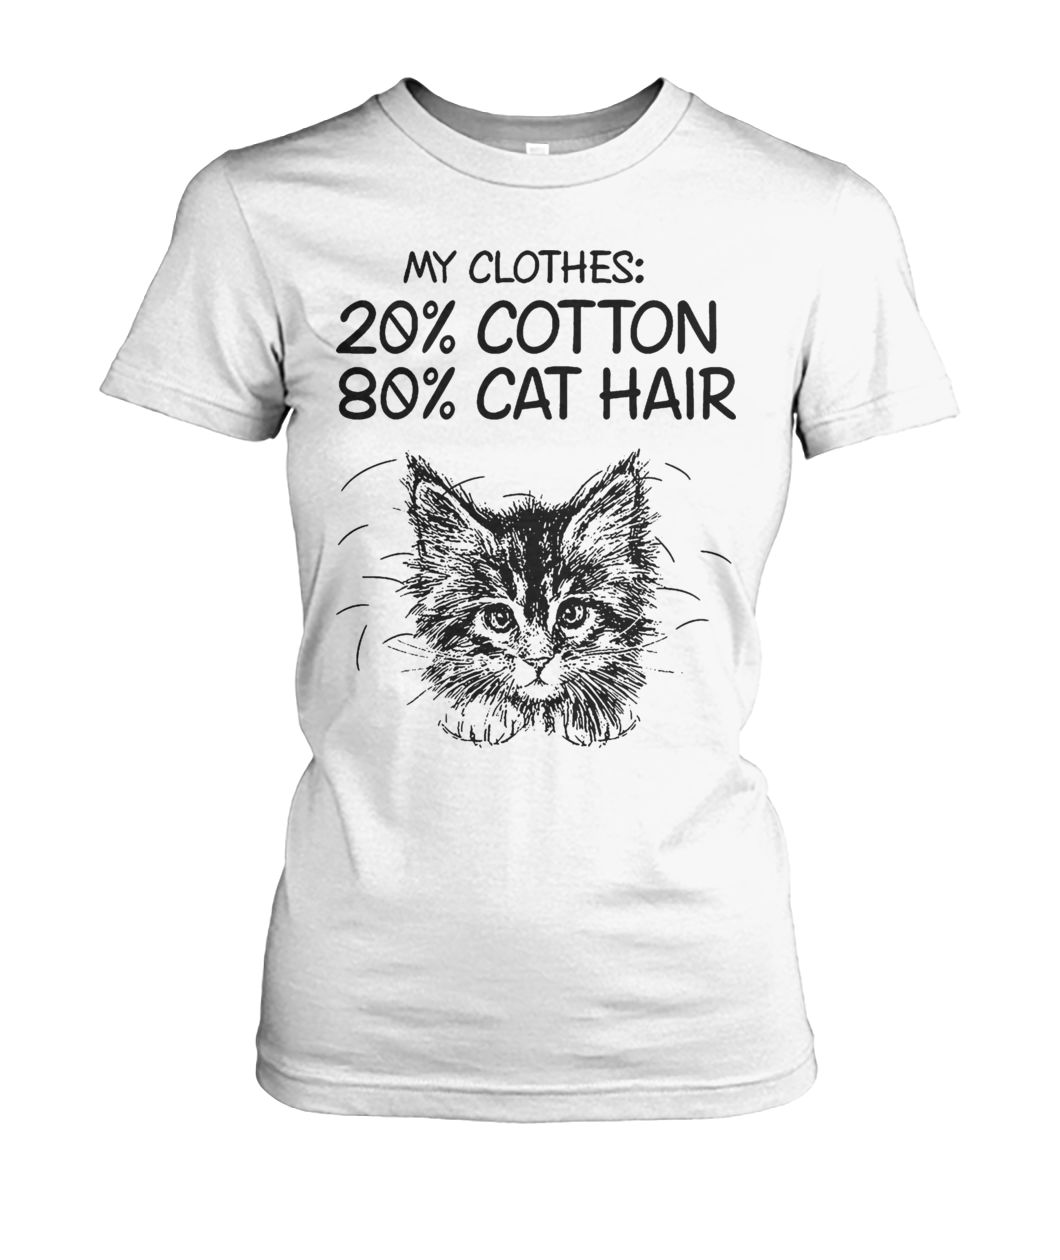 My clothes 20% cotton 80% cat hair women's crew tee